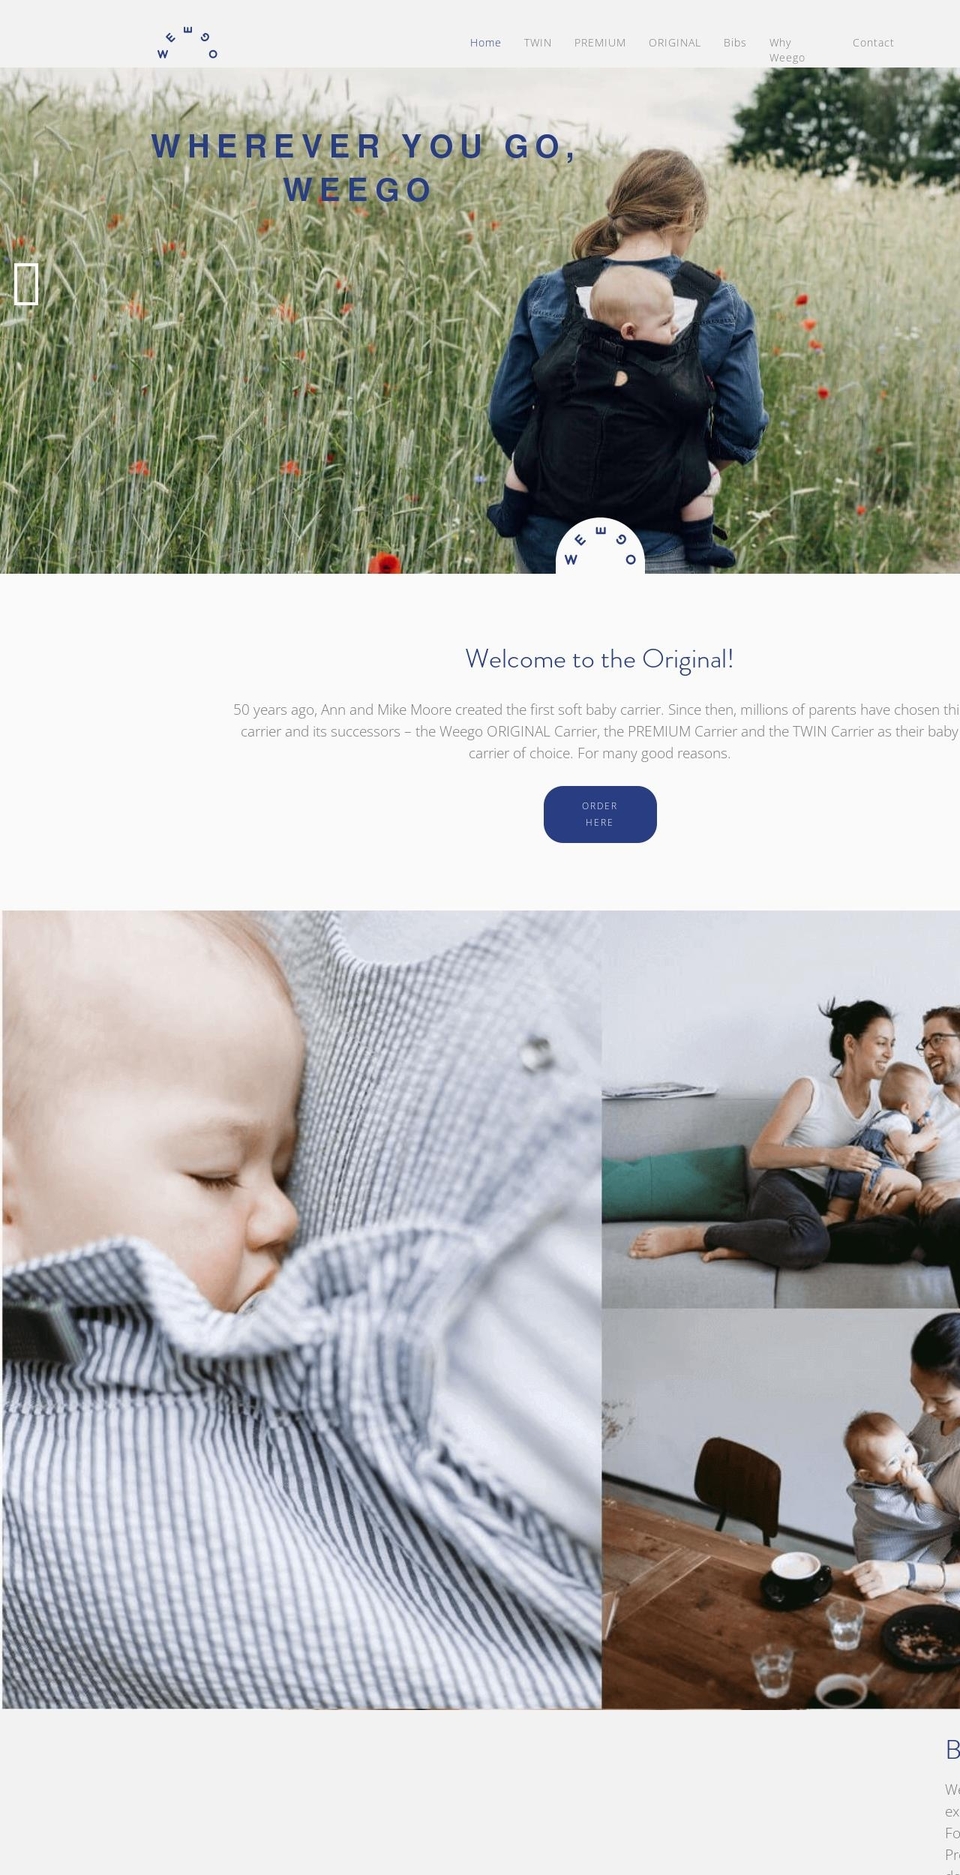 Weego KR Canonical Version Shopify theme site example weegobaby.kr